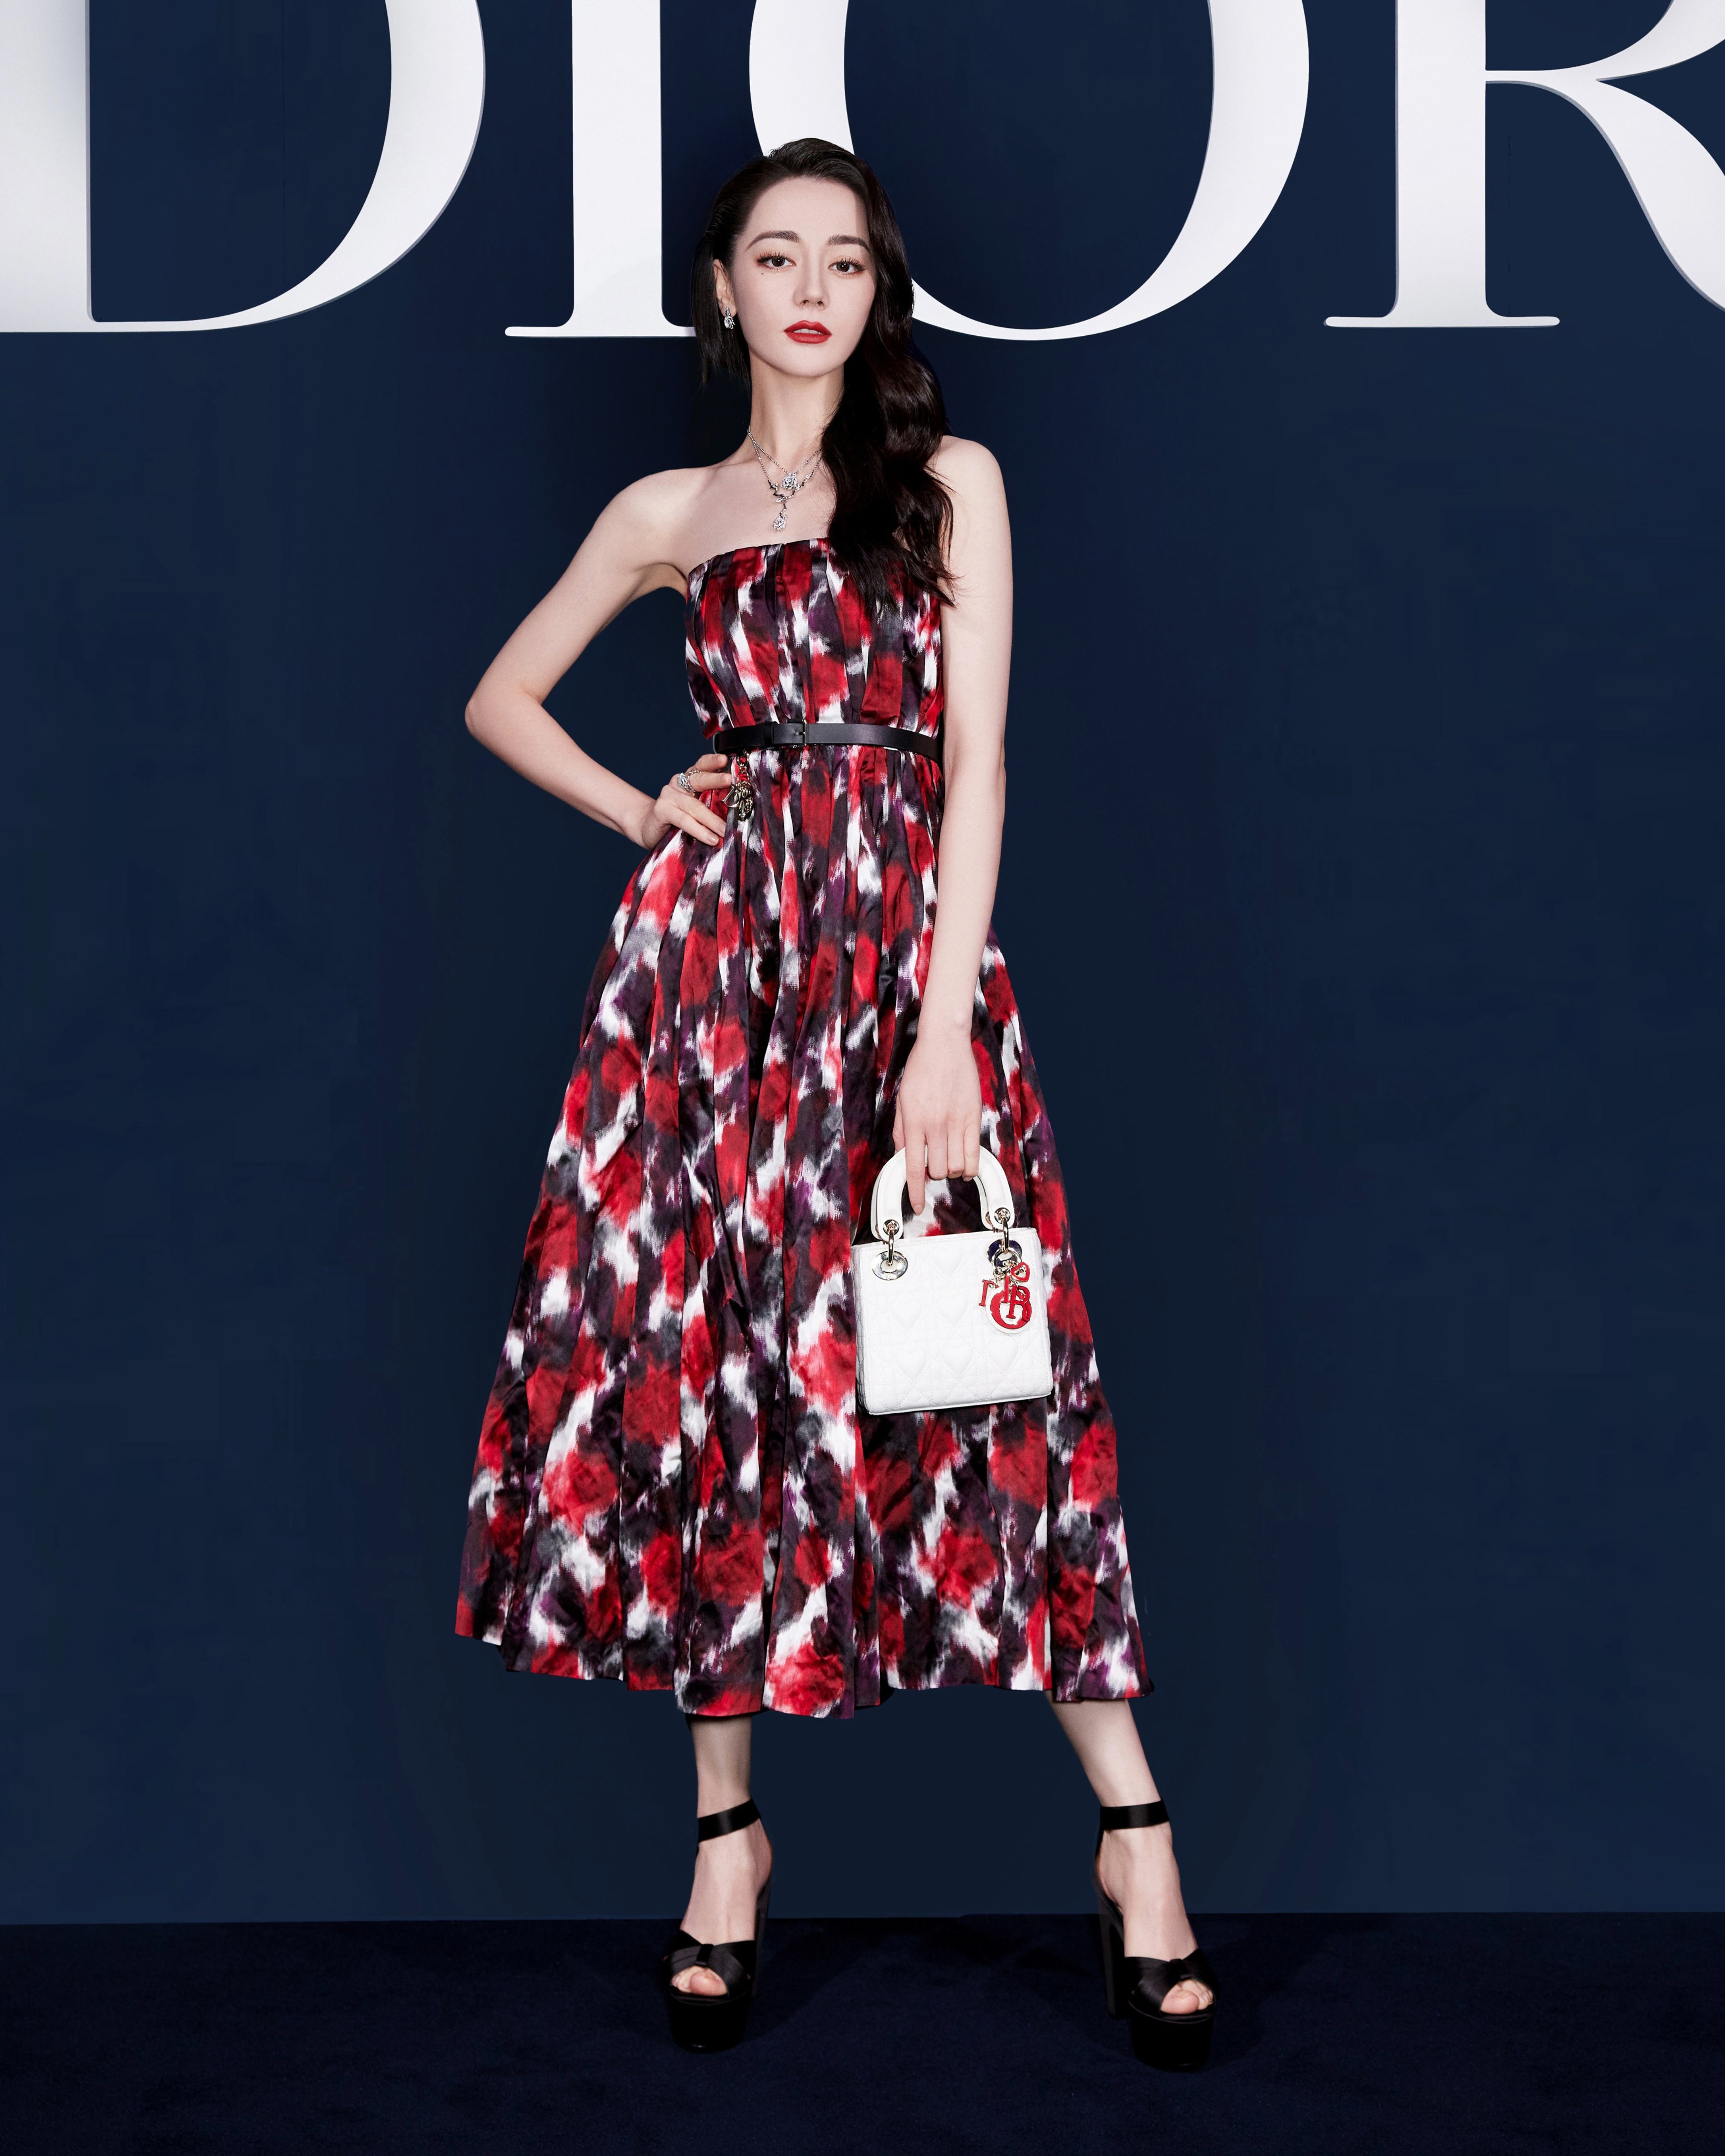 Dior on X: Following the #DiorAW23 repeat show  in  Shenzhen, our #StarsinDior coverage starts with Dior brand ambassador  Dilraba Dilmurat in a look from the collection by Maria Grazia Chiuri with #